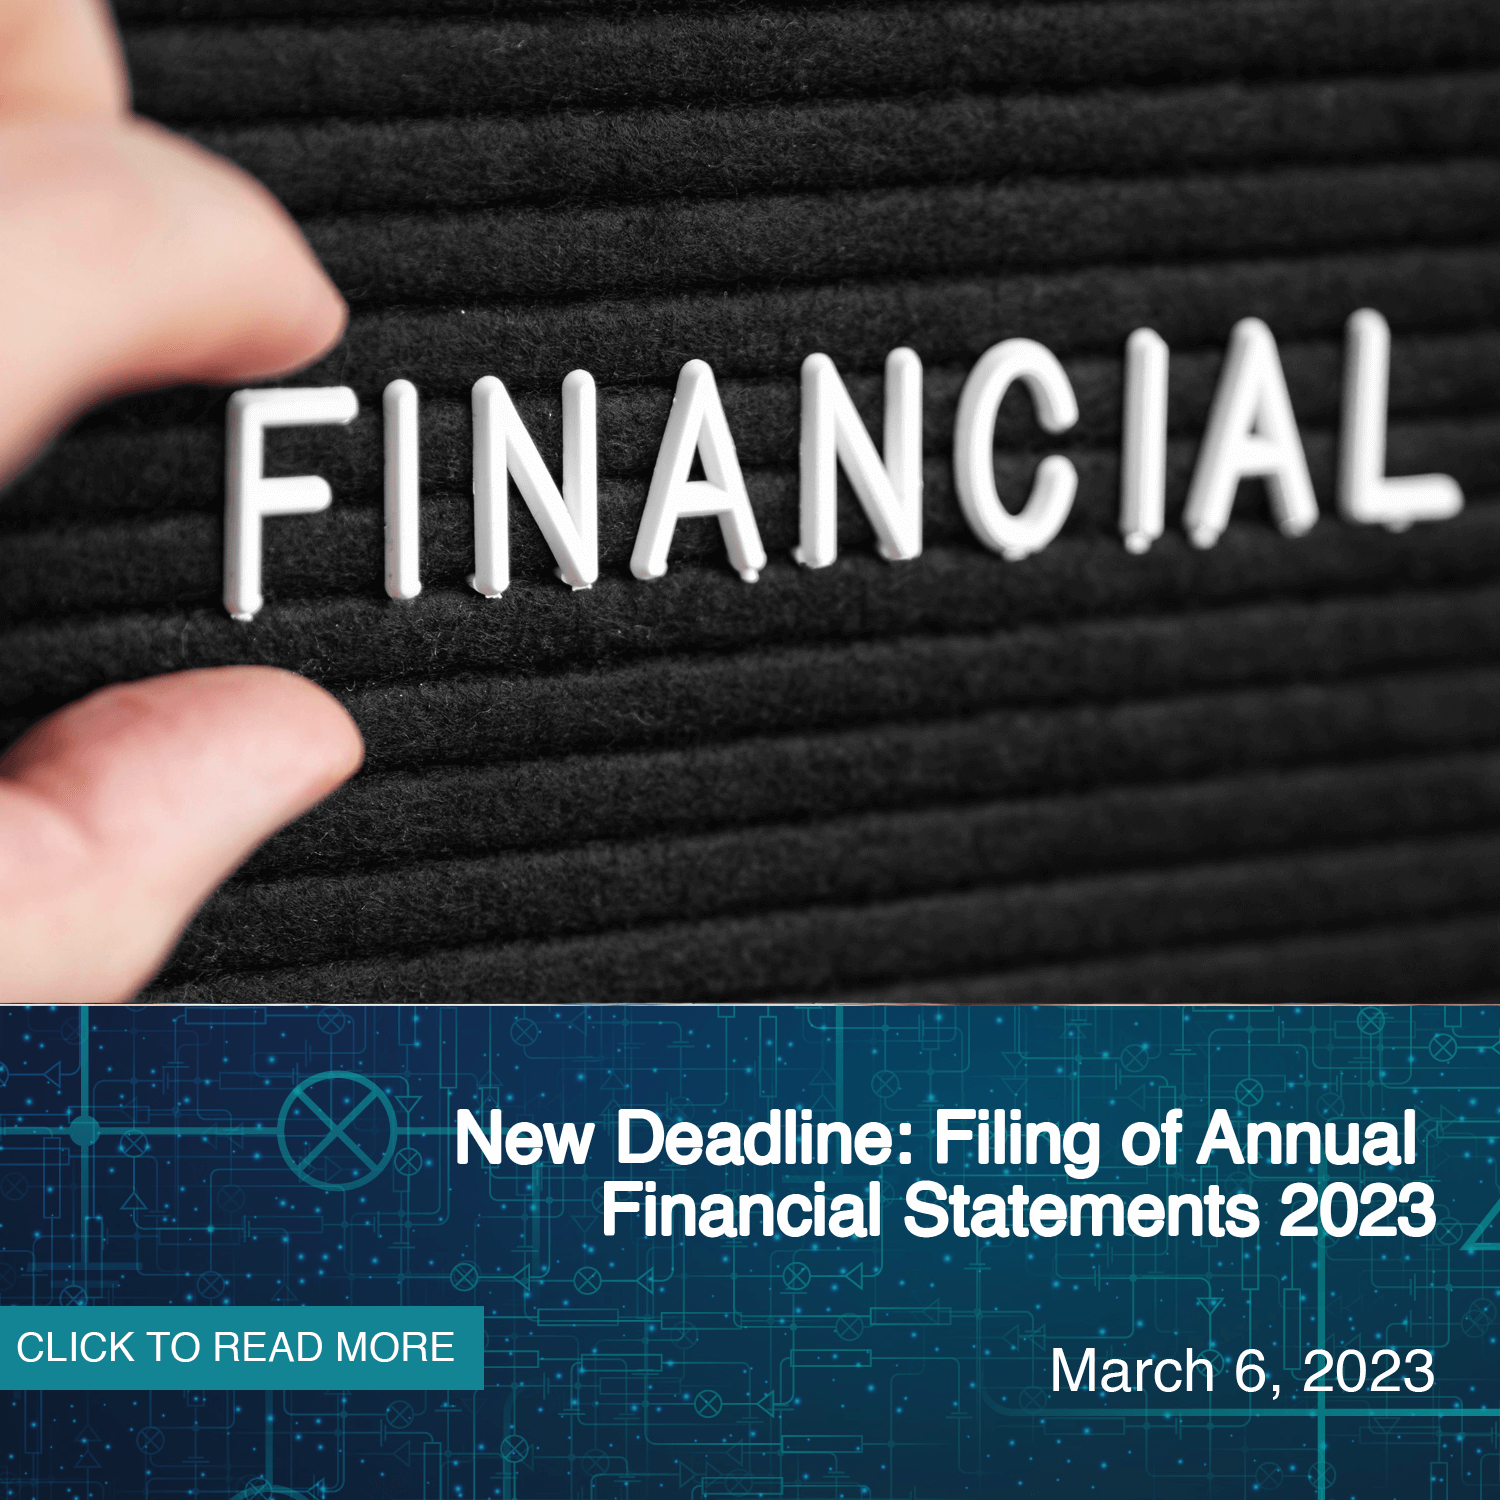 Filing of Annual Financial Statements 2023